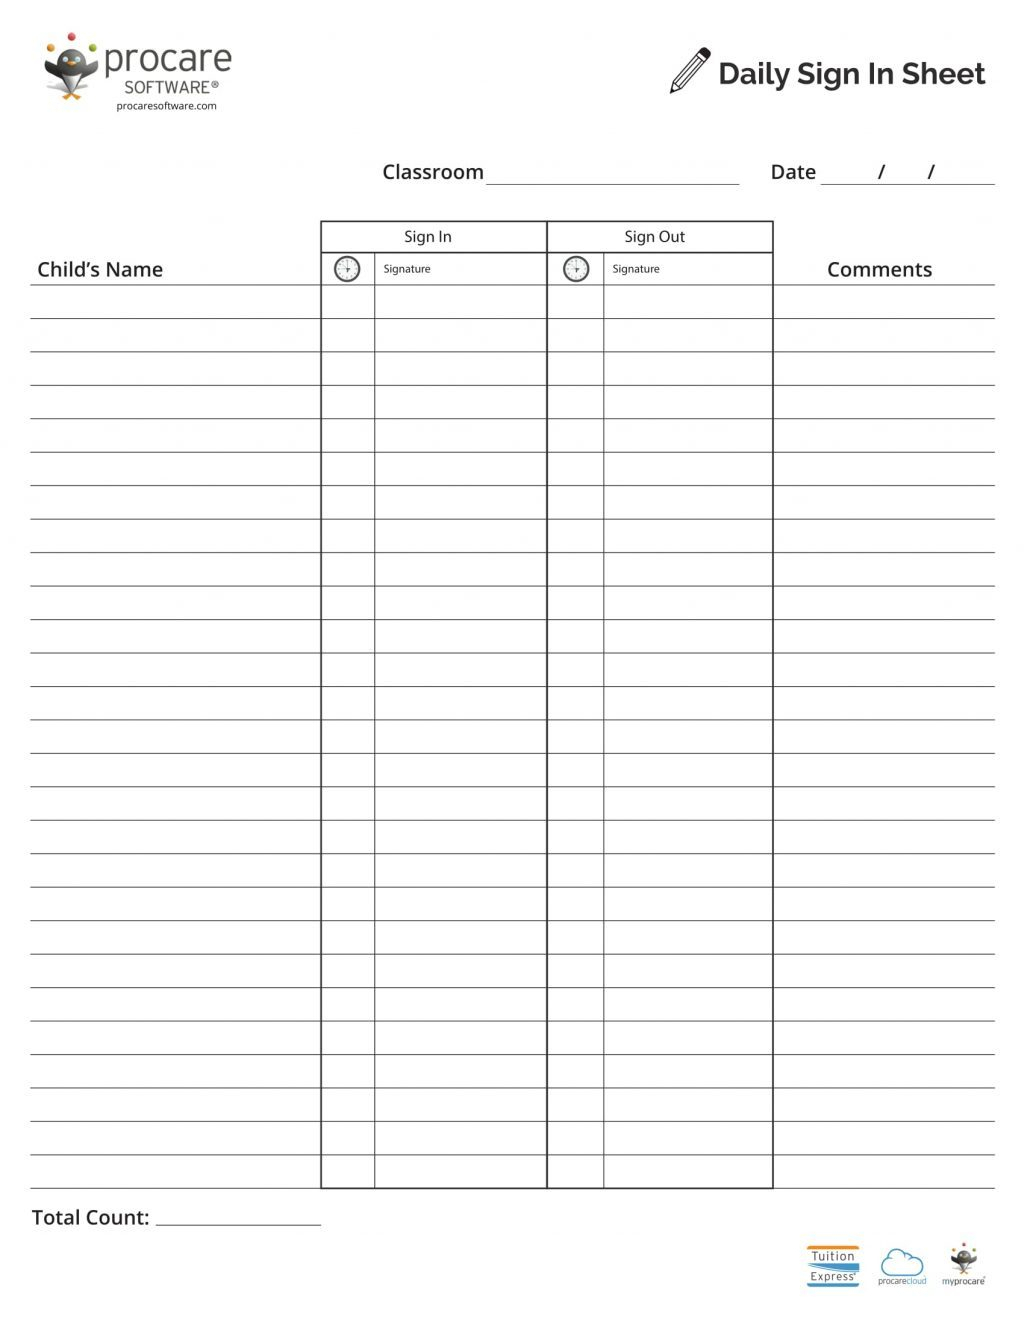 Daycare Payment Spreadsheet Template With Regard To Daycare Excel Spreadsheet Home Payment Log Sheet Template Sign In